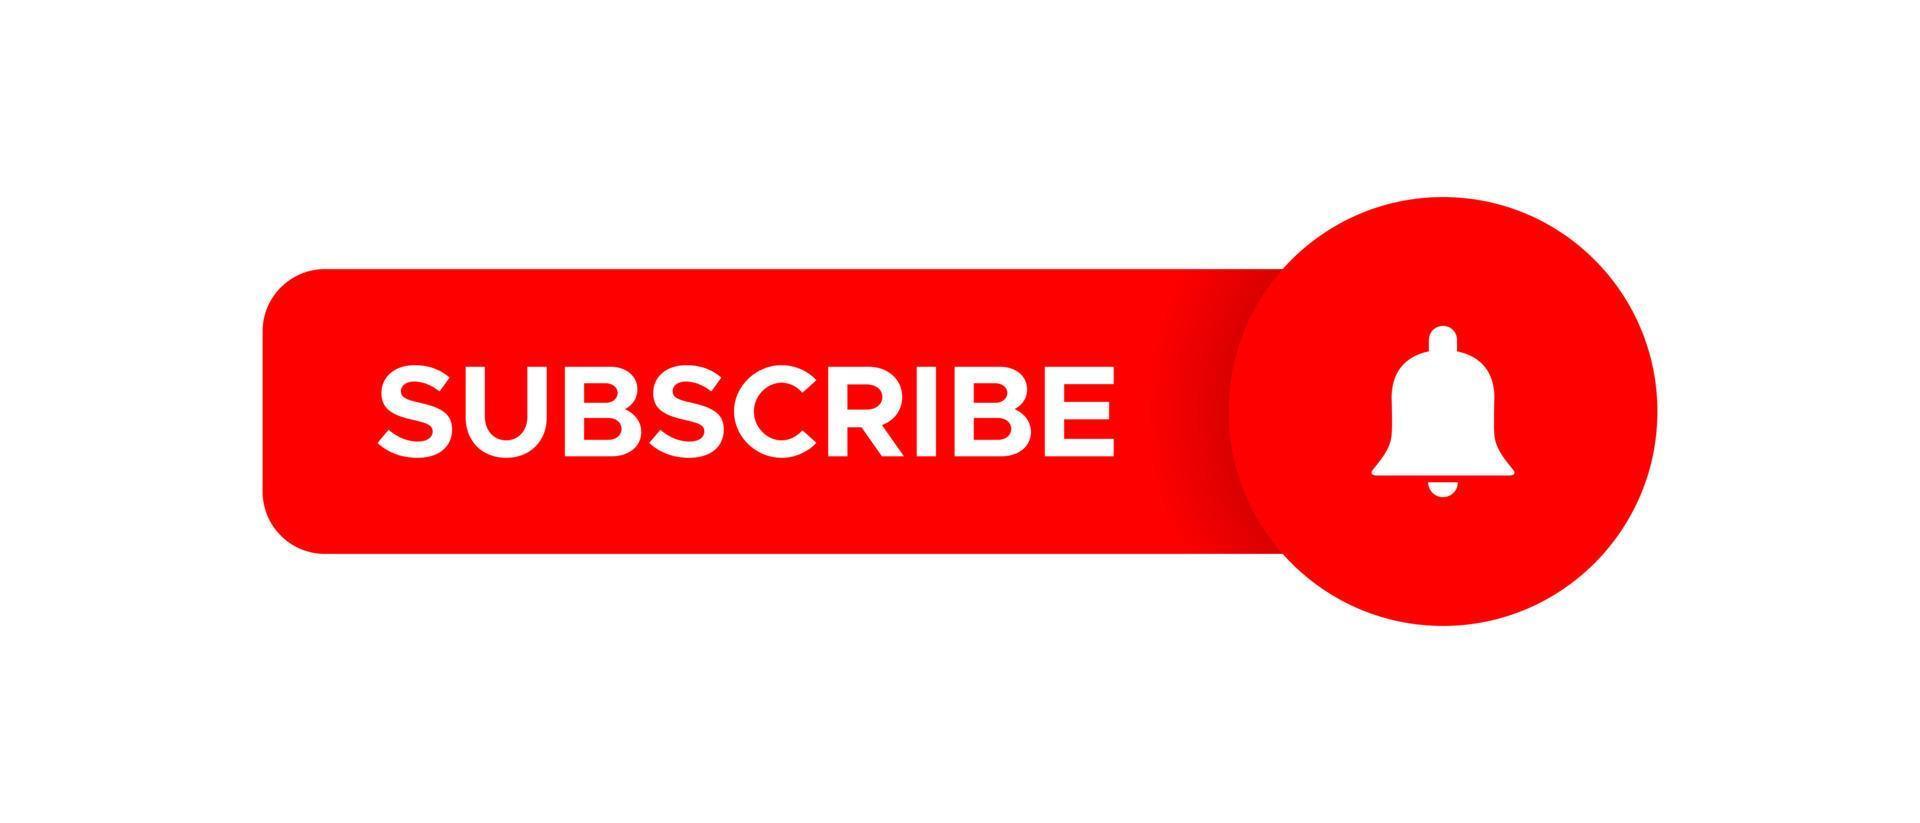 Subscribe Button Icon Vector for Web or Channel Subscriptions